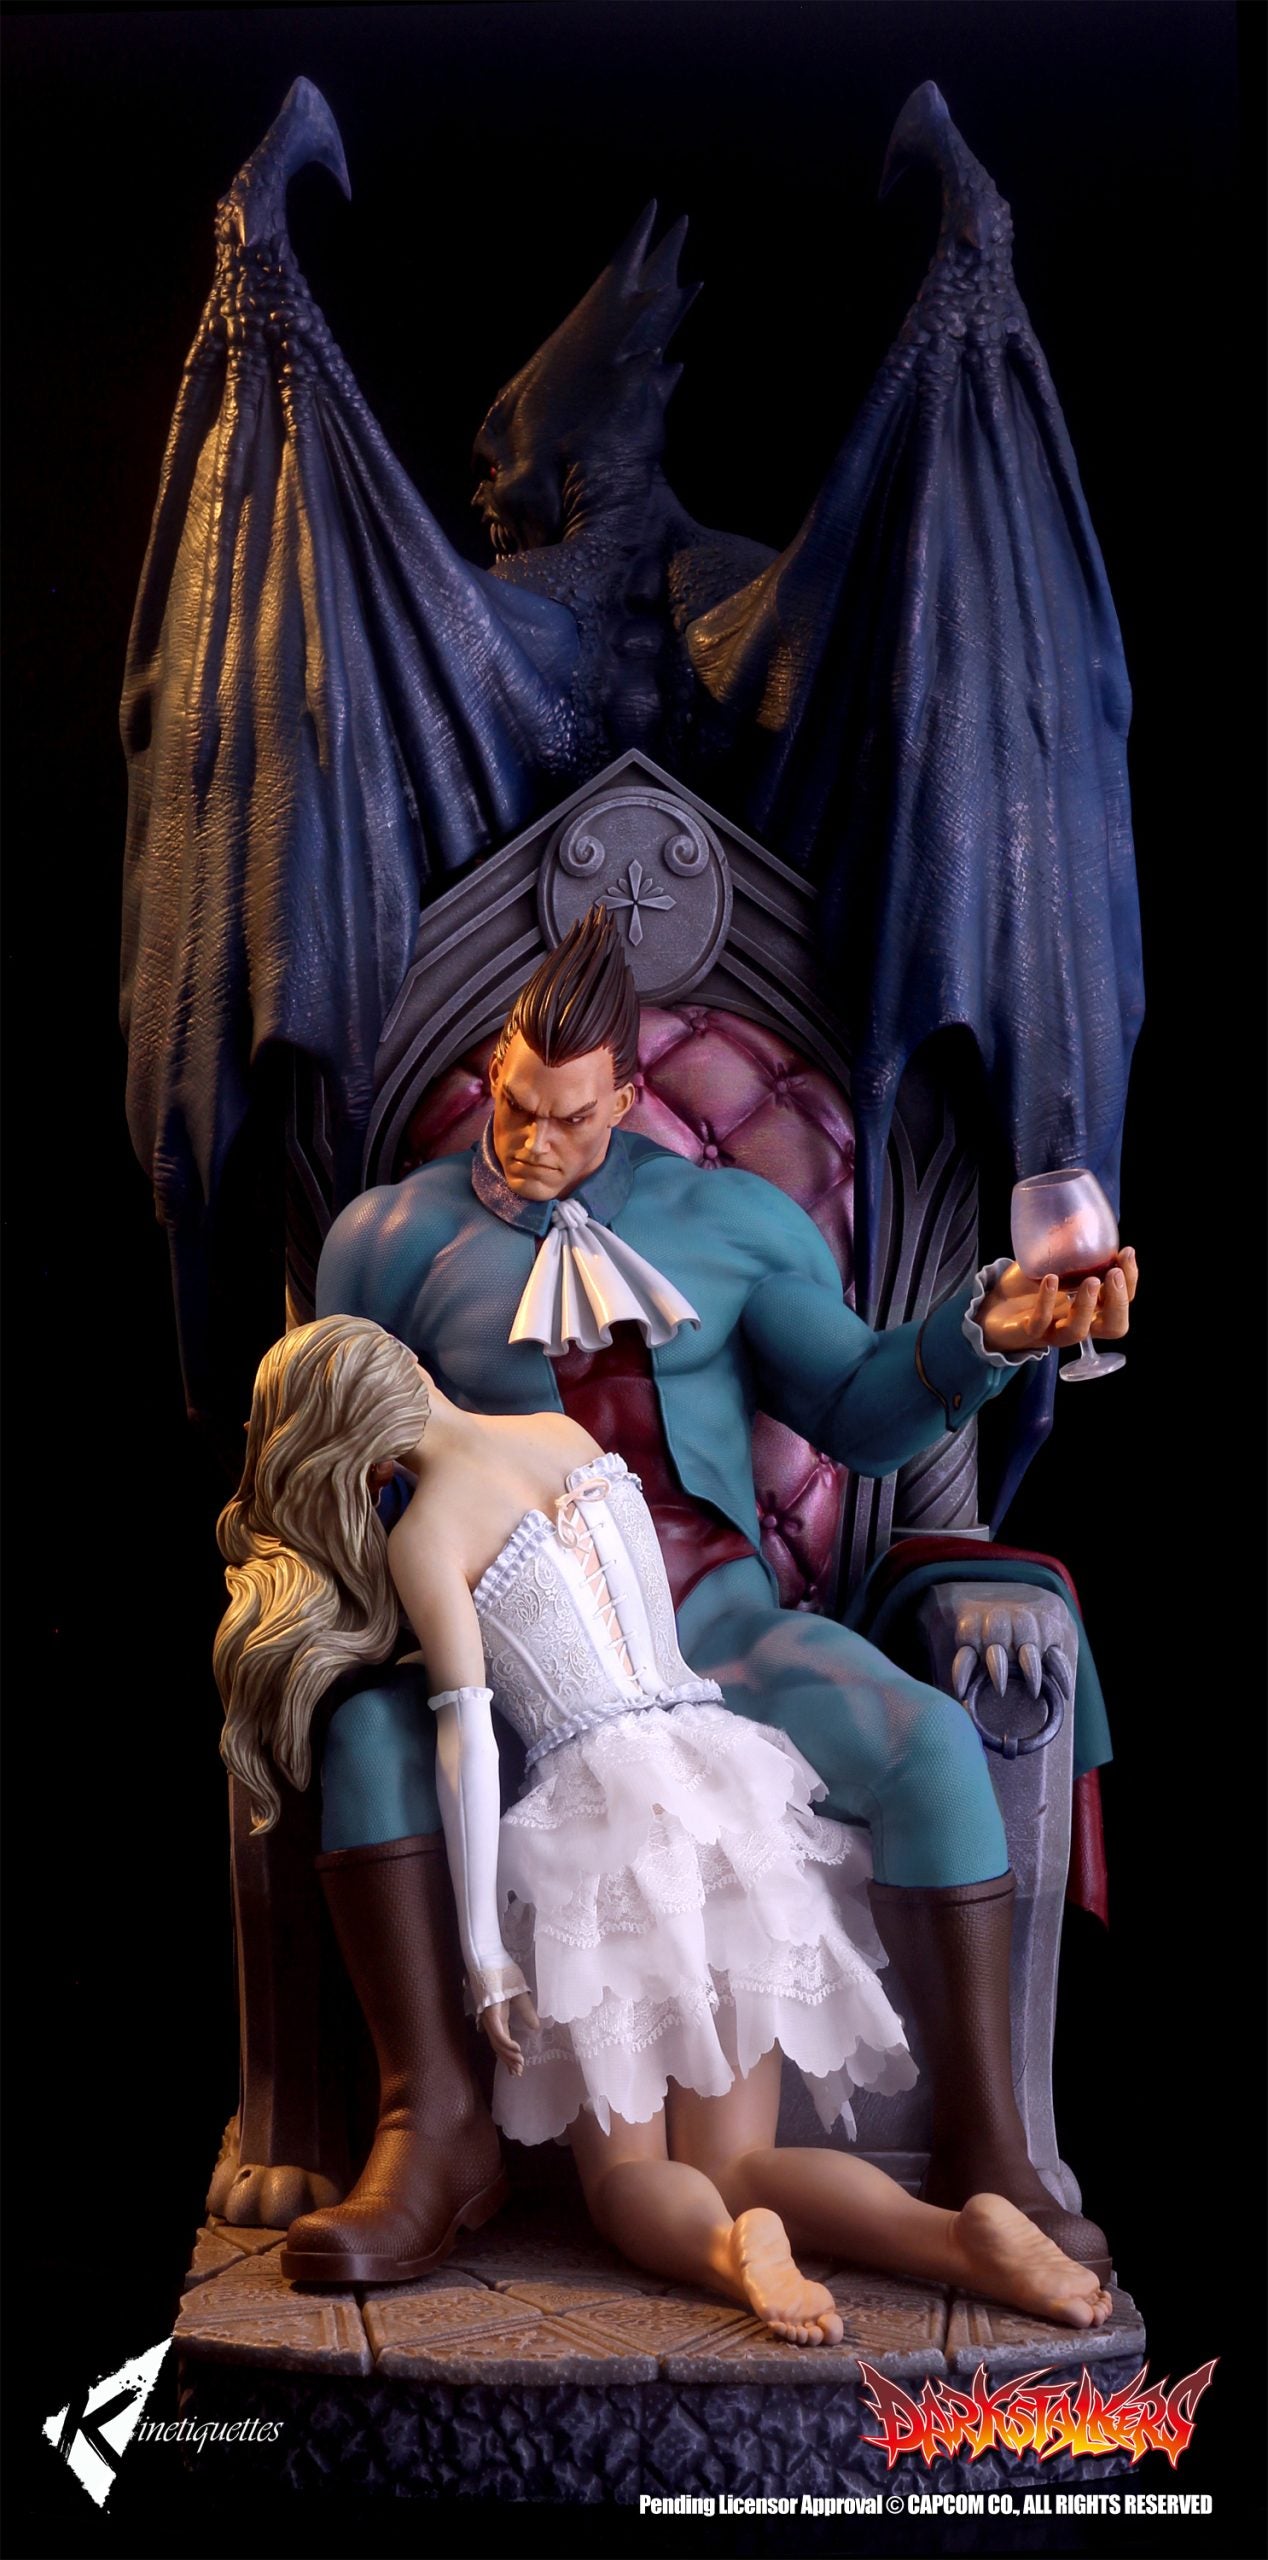 Kinetiquettes - Darkstalkers - Demitri Maximoff (デミトリ) – The Ruler of Zeltzereich (Deluxe Ed.) (1/4 Scale)